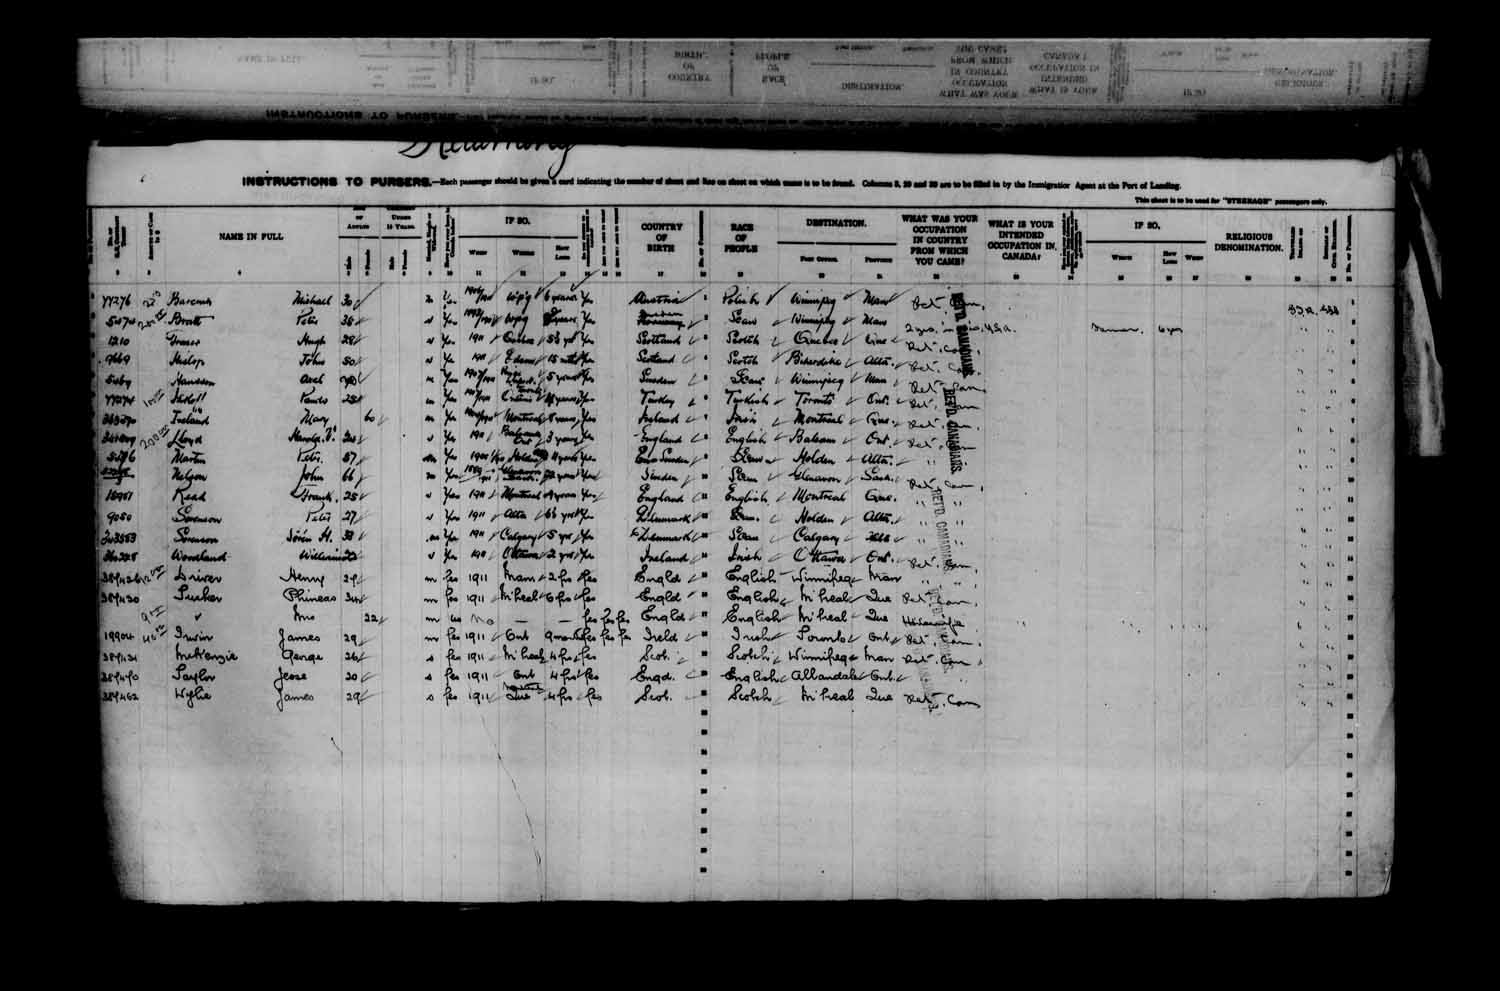 Digitized page of Passenger Lists for Image No.: e003622989